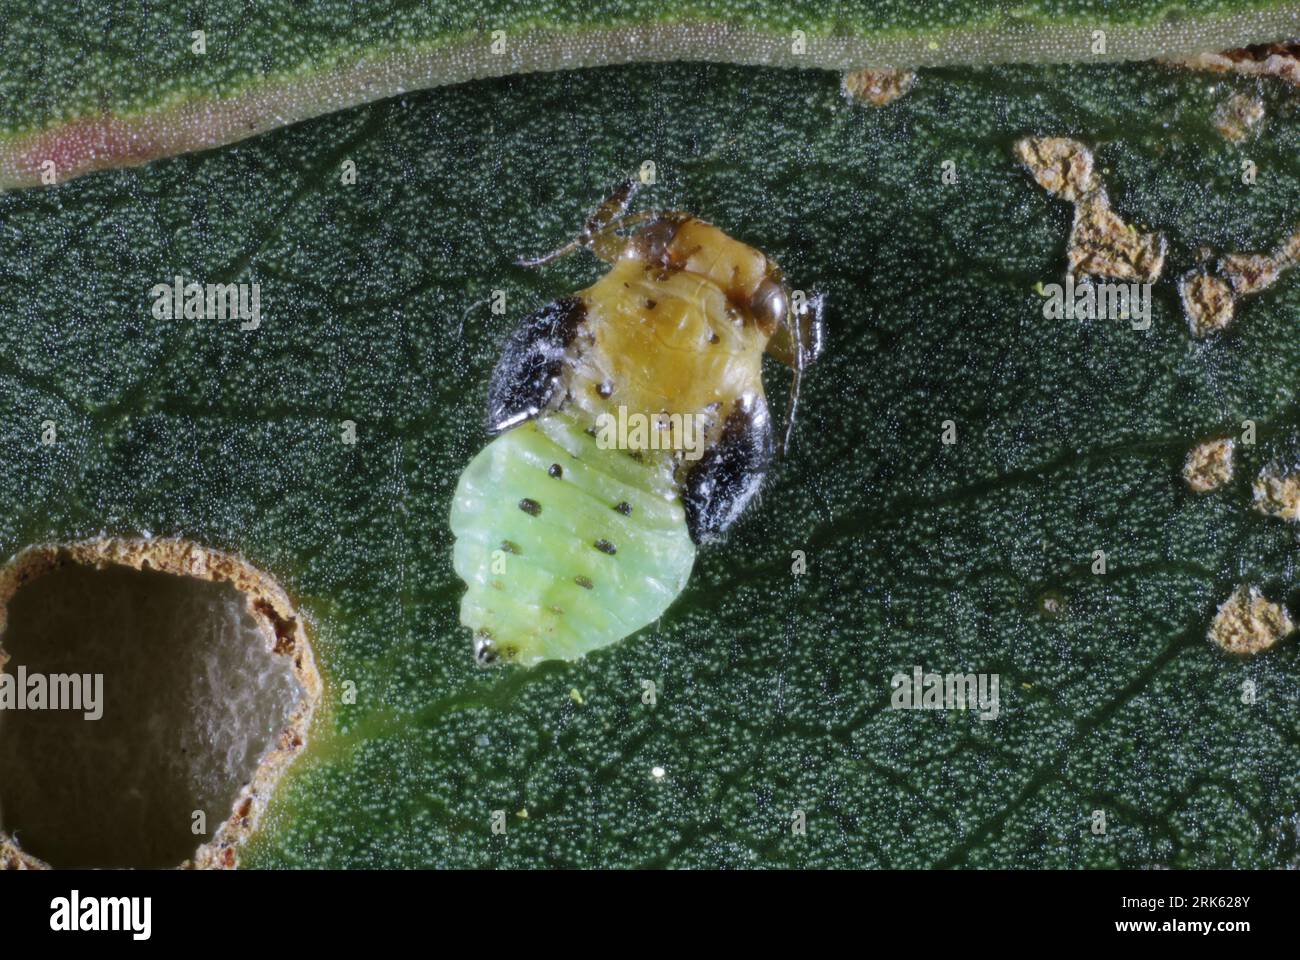 Instar nymph of psyllid  in leaf nest, South Australia Stock Photo